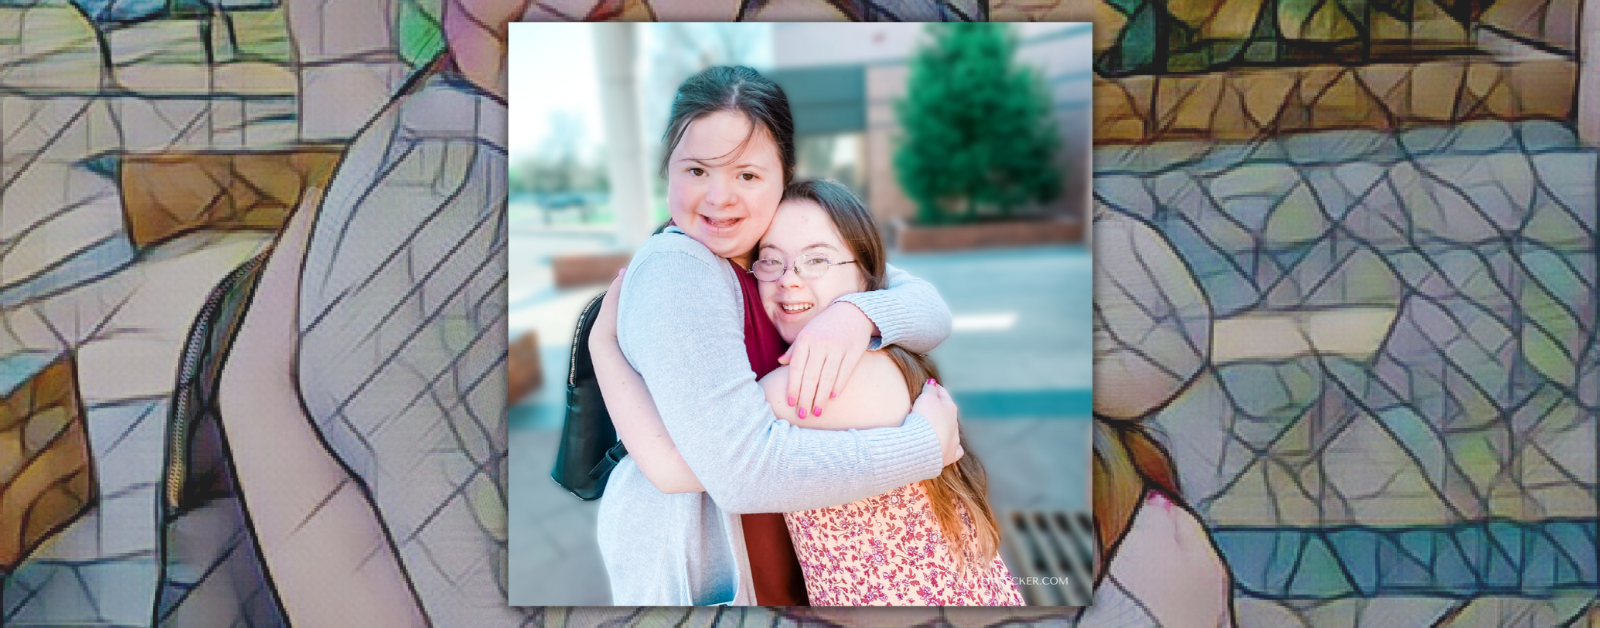 Rachel and Penny, two teenagers who have Down syndrome, give each other a hug